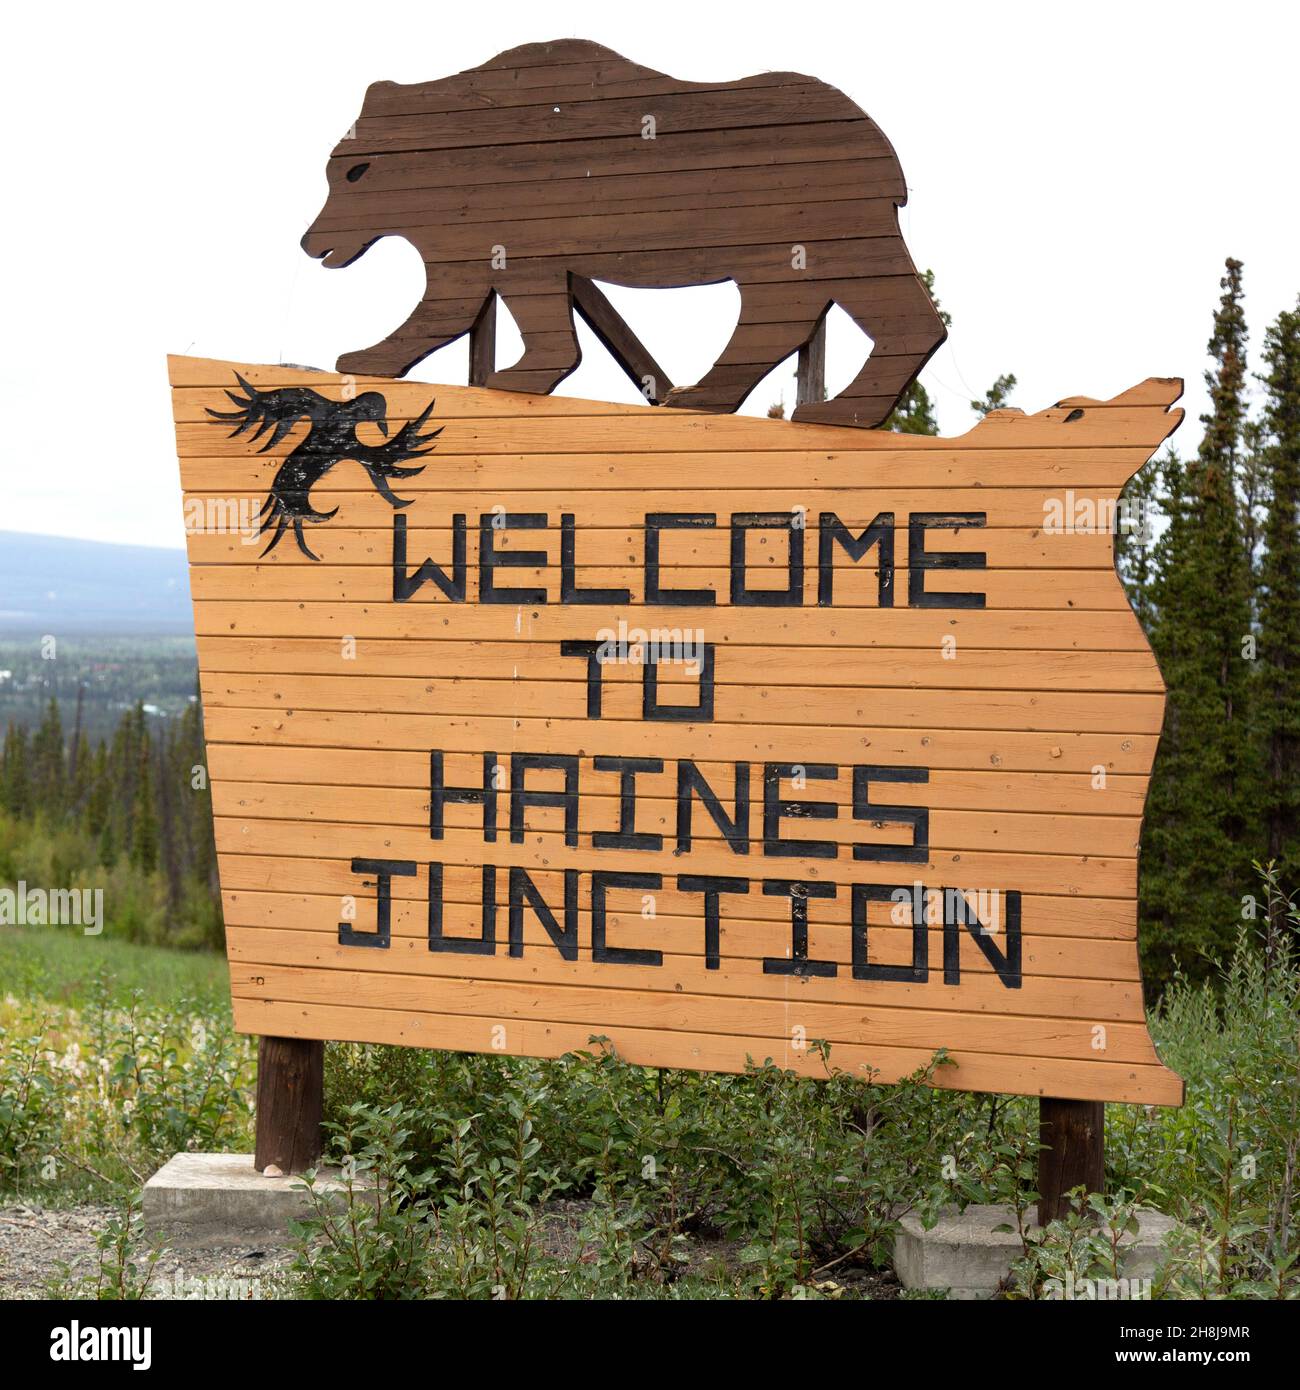 Sign for Haines Junction in south-west of the Yukon, Canada. The wooden sign features a figure representing a grizzly bear. Stock Photo